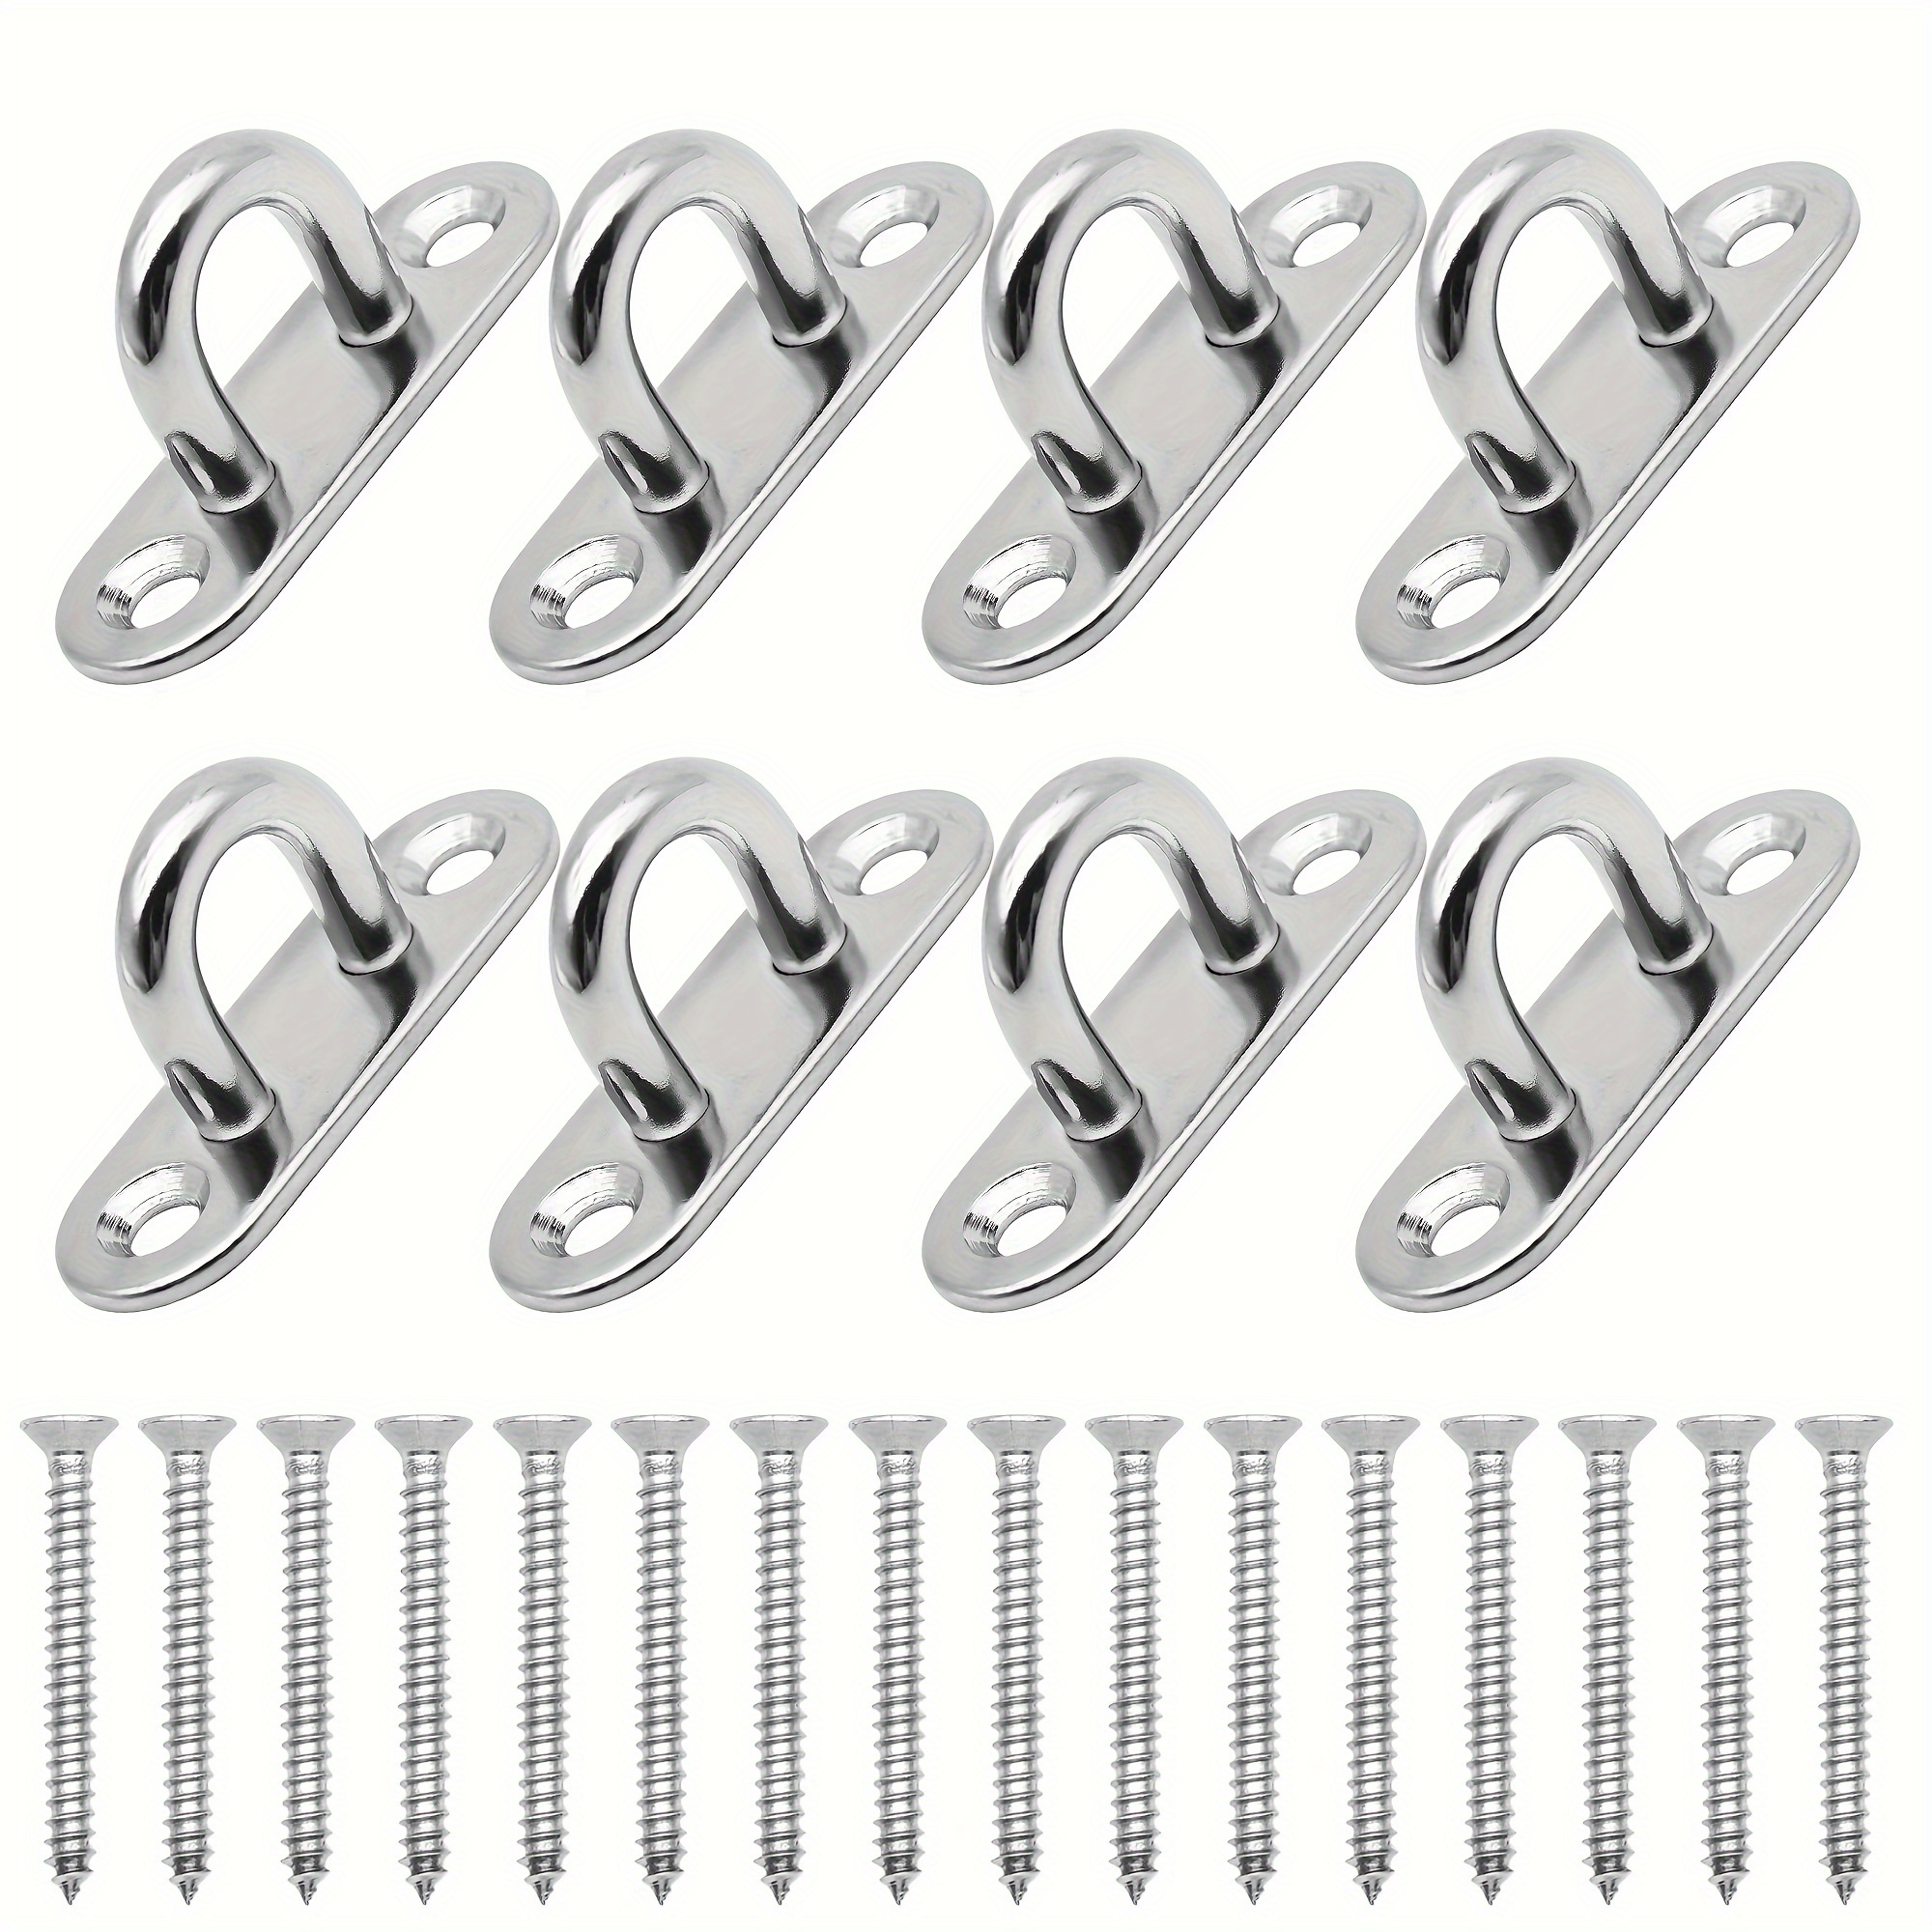 8pcs Fixed Buckle With Screws, Stainless Steel 5mm Durable Wall Mounted  Clip Hook, Metal Fixed Ring Mounting Hook With Screws, For Hanging Items,  Awni